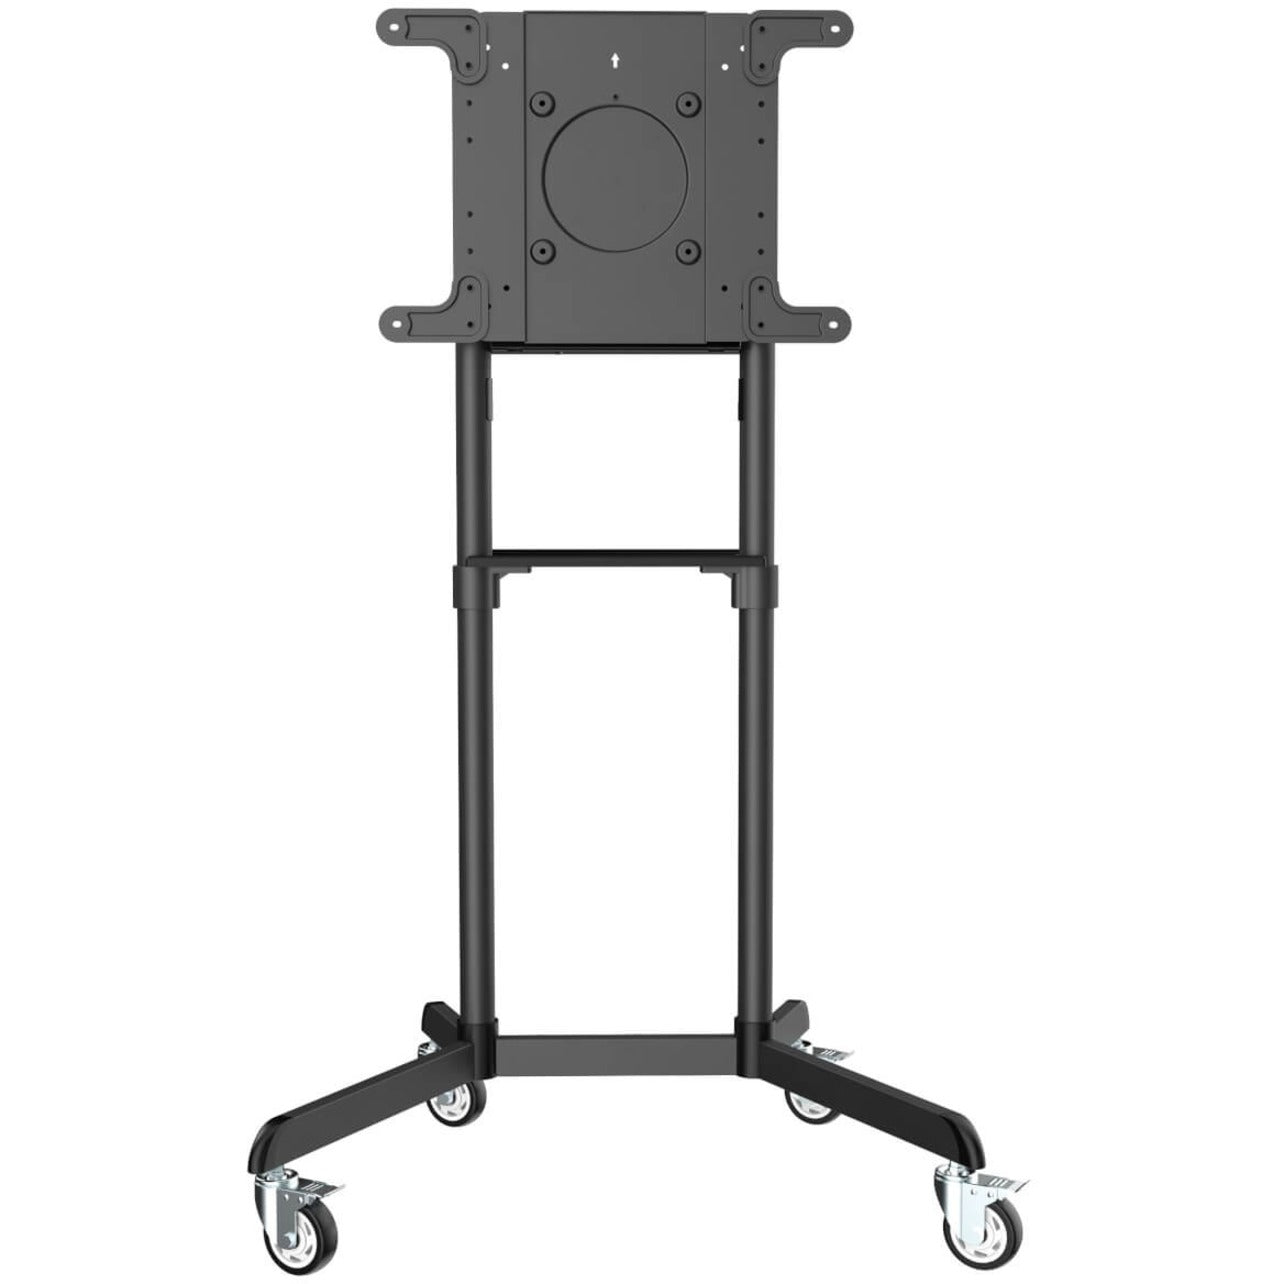 Tripp Lite DMCS3770ROT Mobile TV Stand Cart Rotating 37-70in, Heavy Duty, Adjustable Height, 165 lb Load Capacity